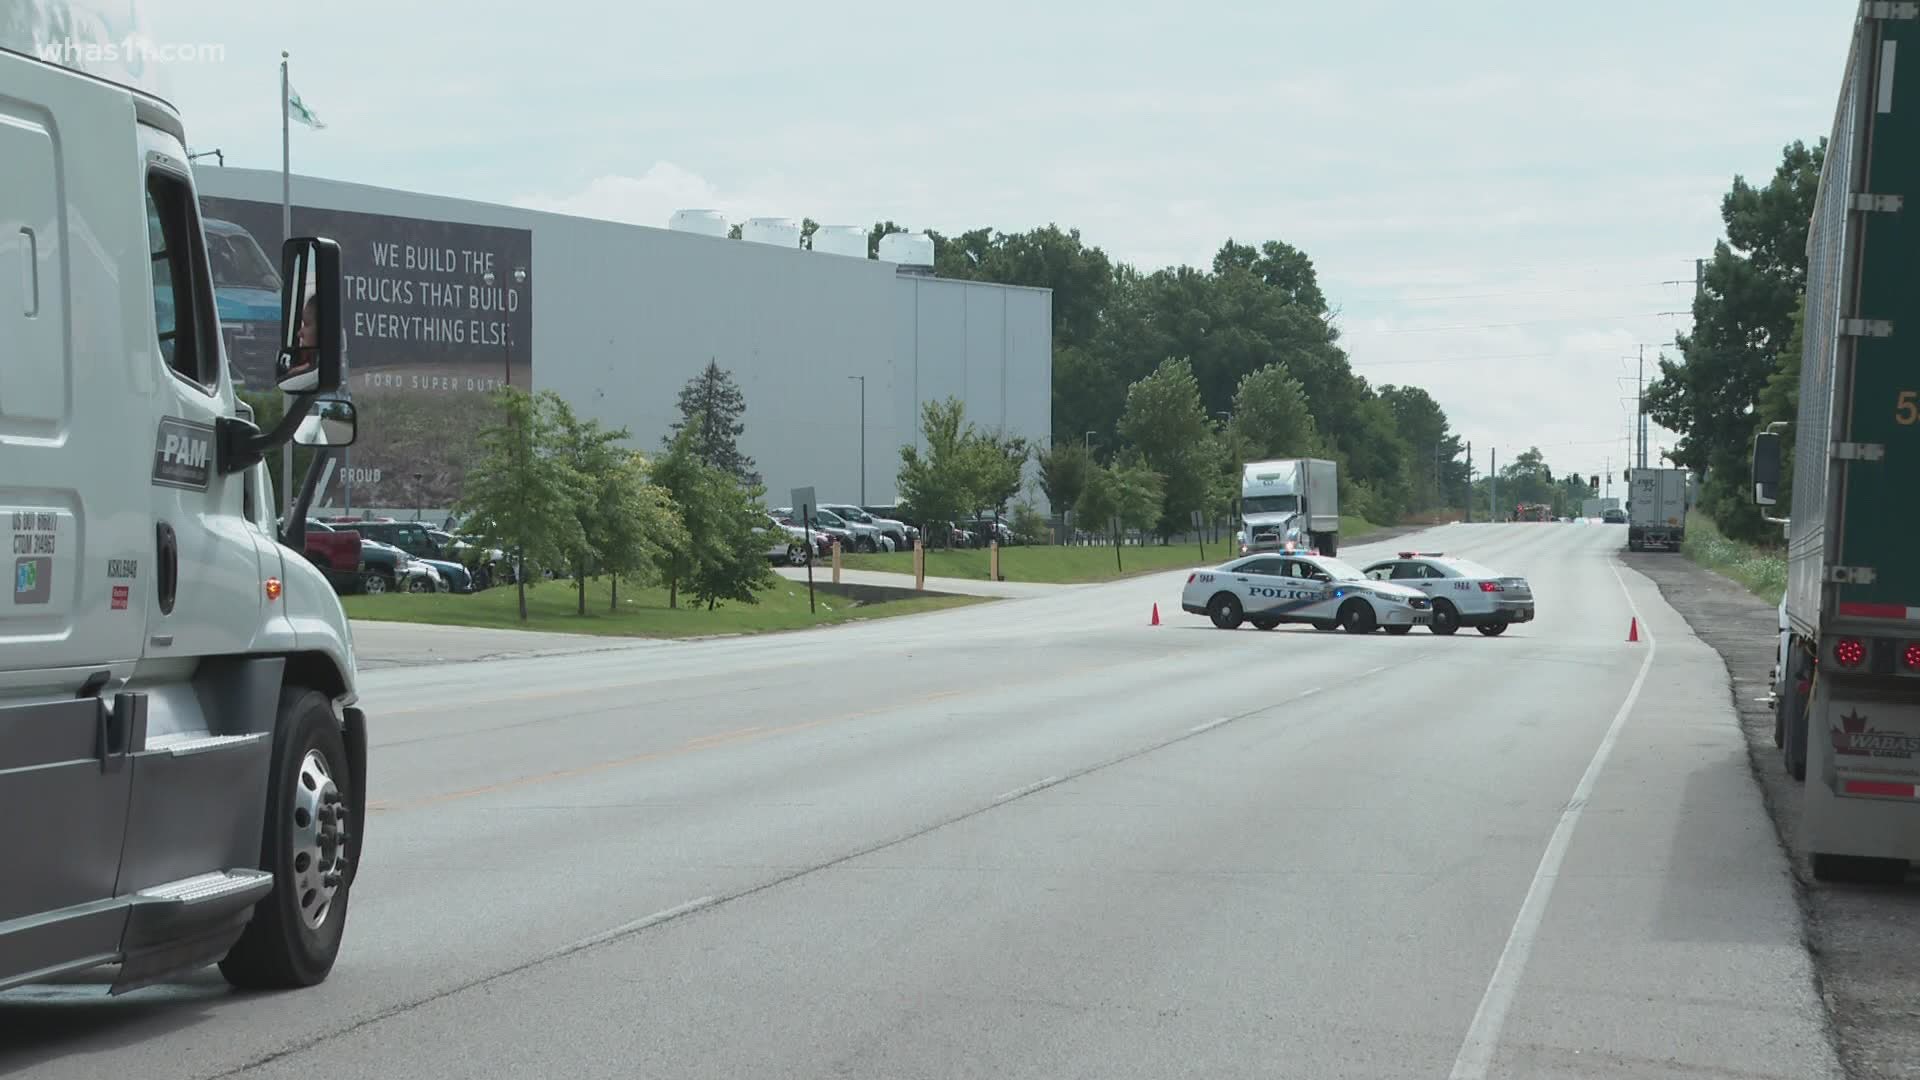 LMPD says a semi-tractor trailer hit a northbound driving vehicle as it was turning left into the Ford Truck Plant.